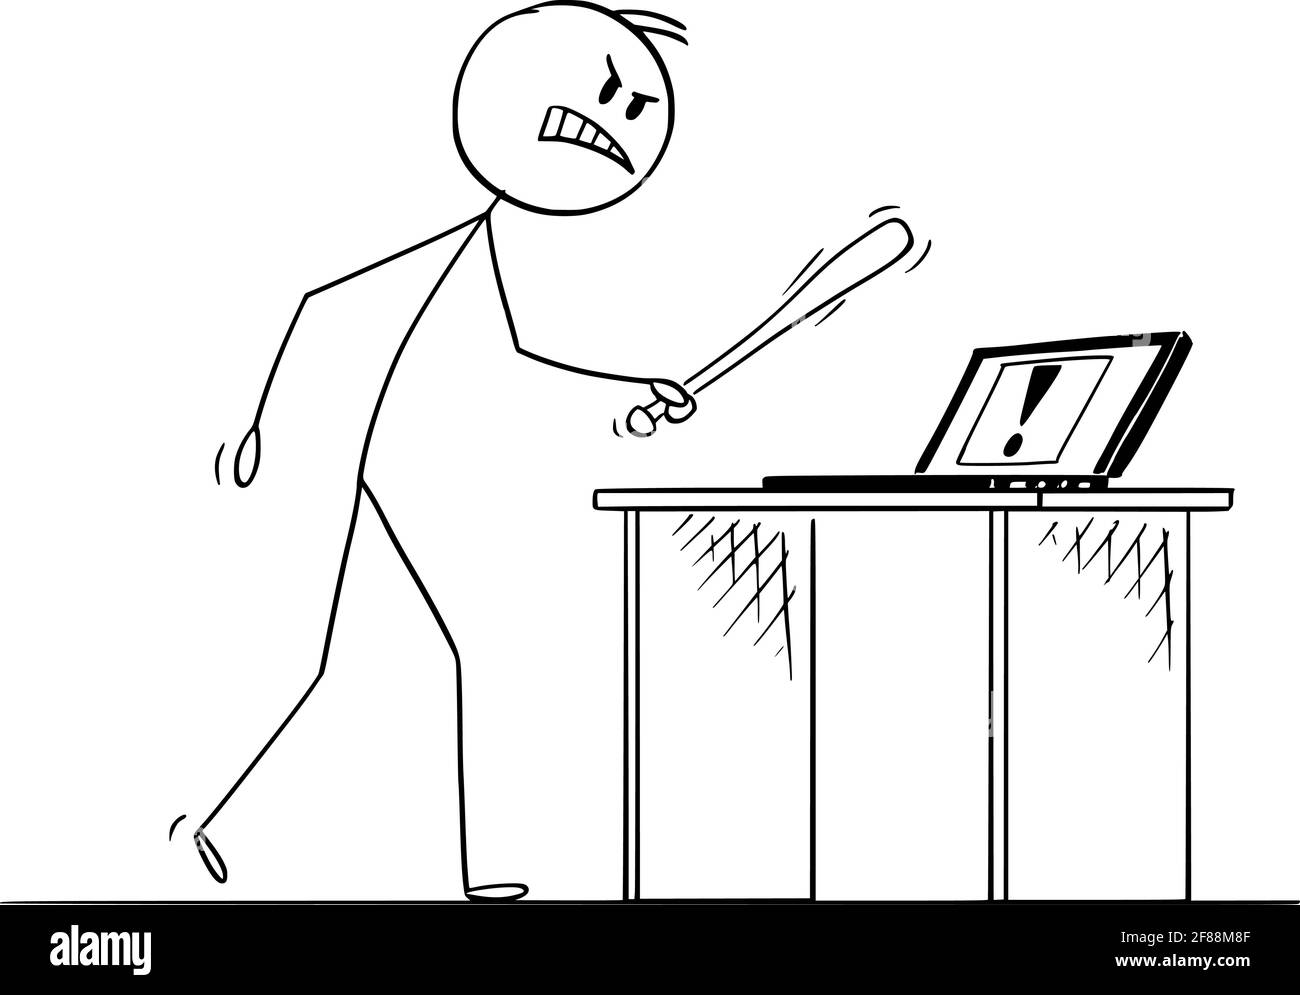 Computer Failure or Error and Angry User with Baseball Bat, Vector Cartoon Stick Figure Illustration Stock Vector